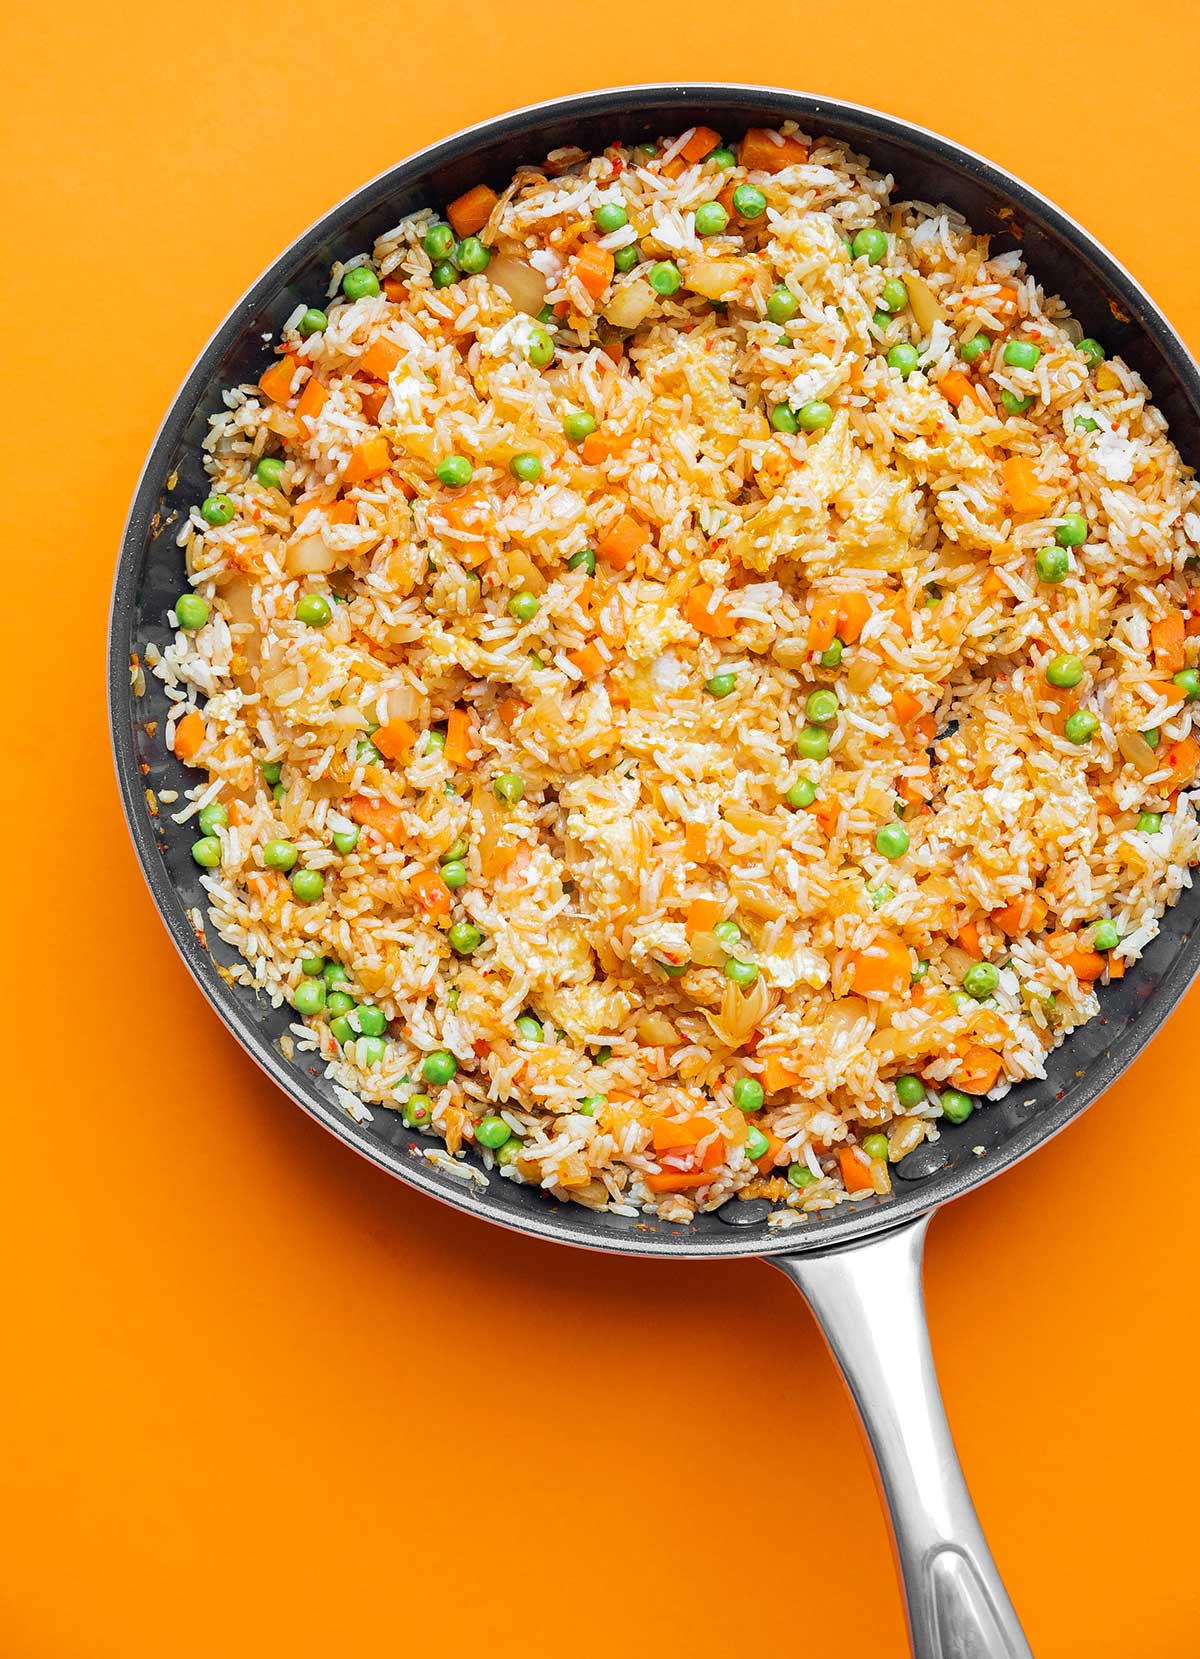 Kimchi fried rice cooking in a skillet on an orange background